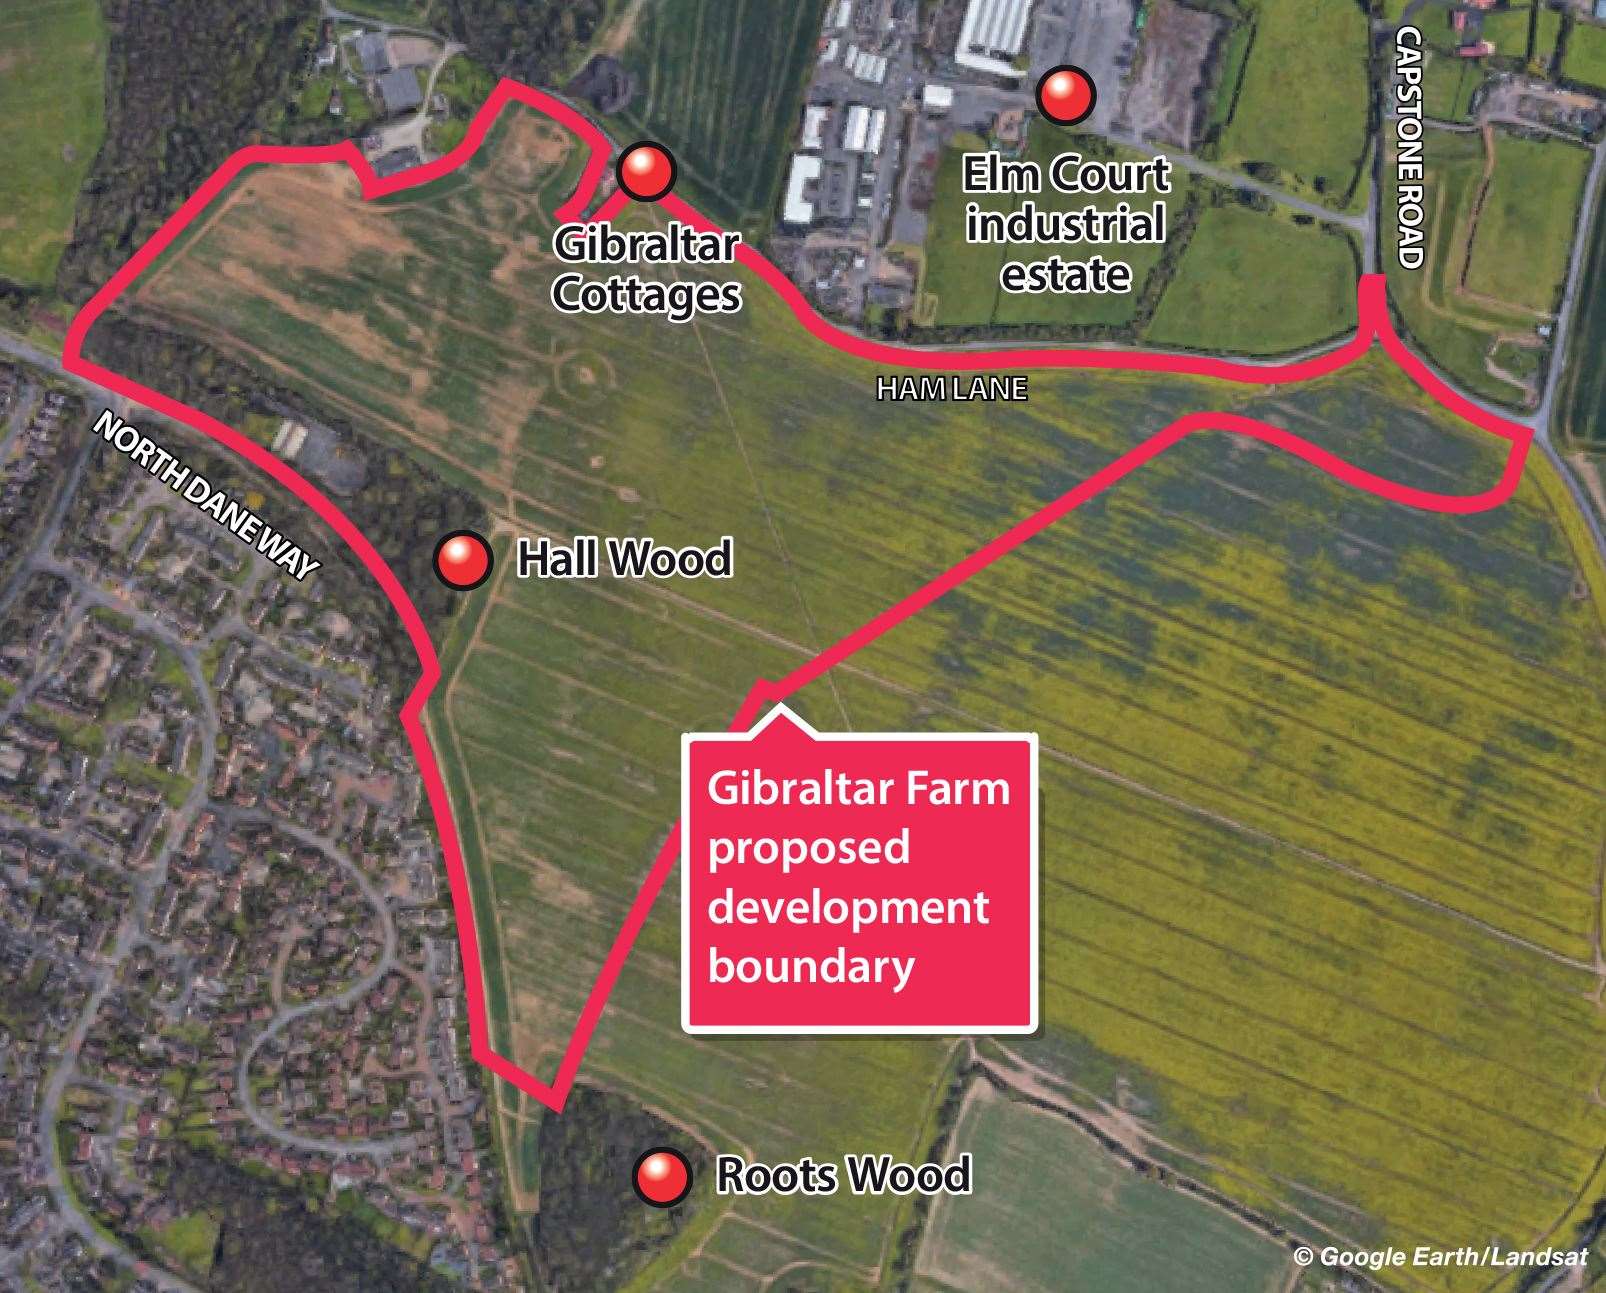 East Hill map and Gibraltar Farm proposed boundary